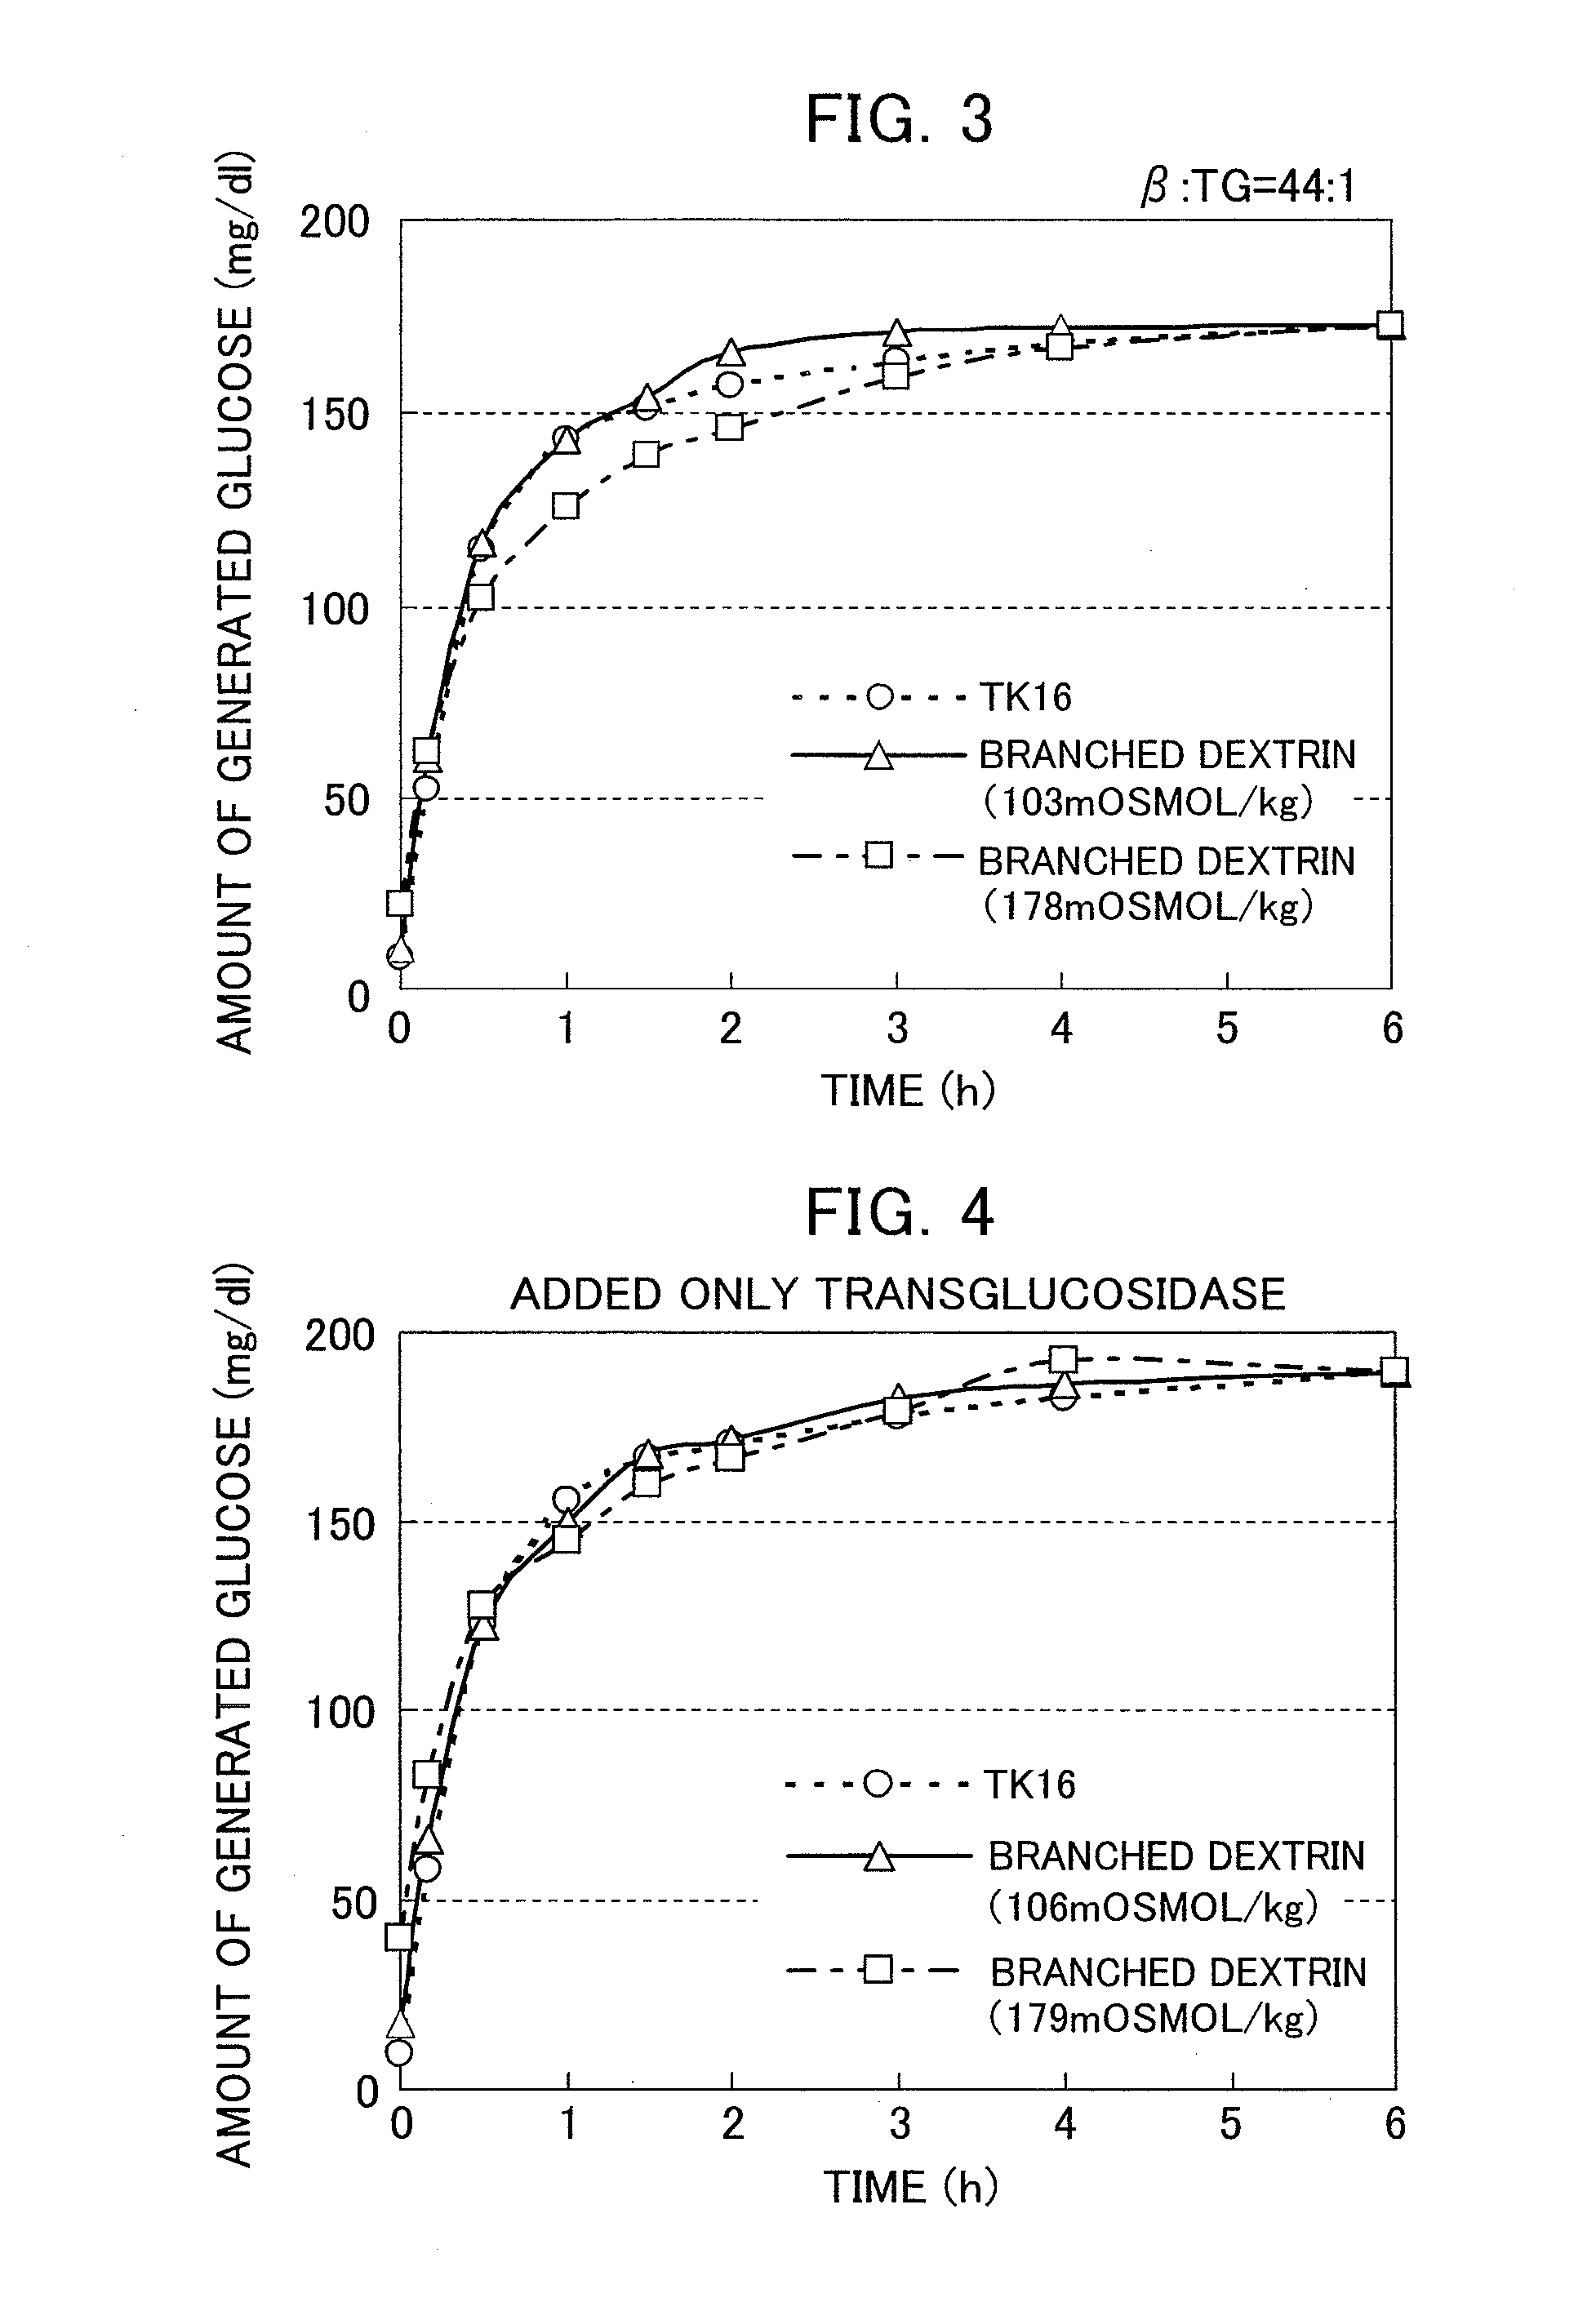 Branched dextrin, process for production thereof, and food or beverage